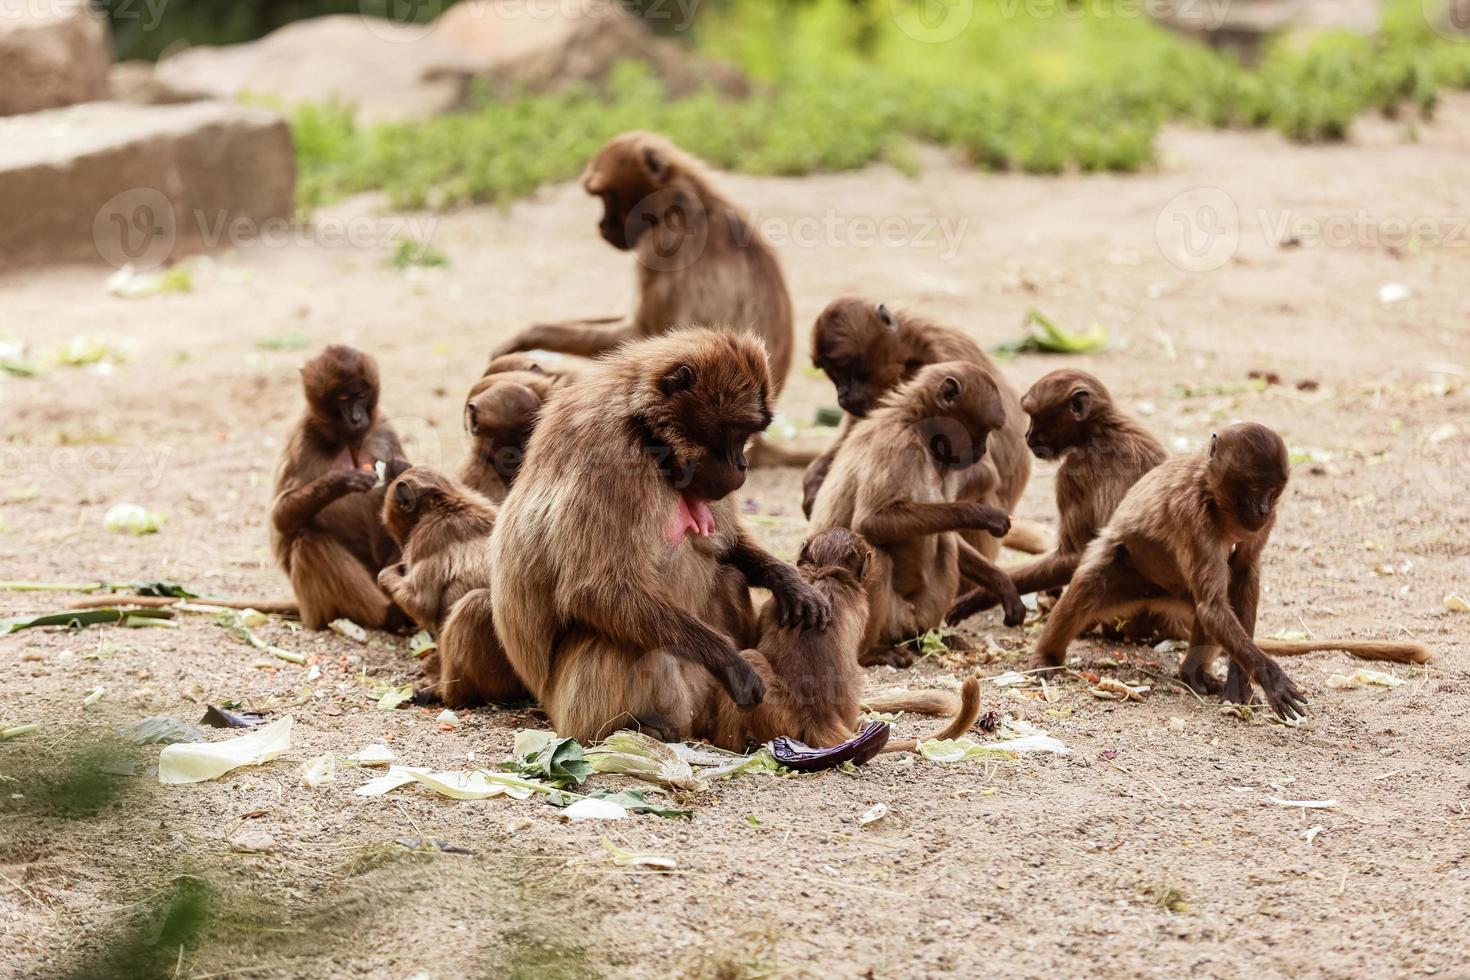 A group of monkeys macaques on the ground in the park in their daily life photo